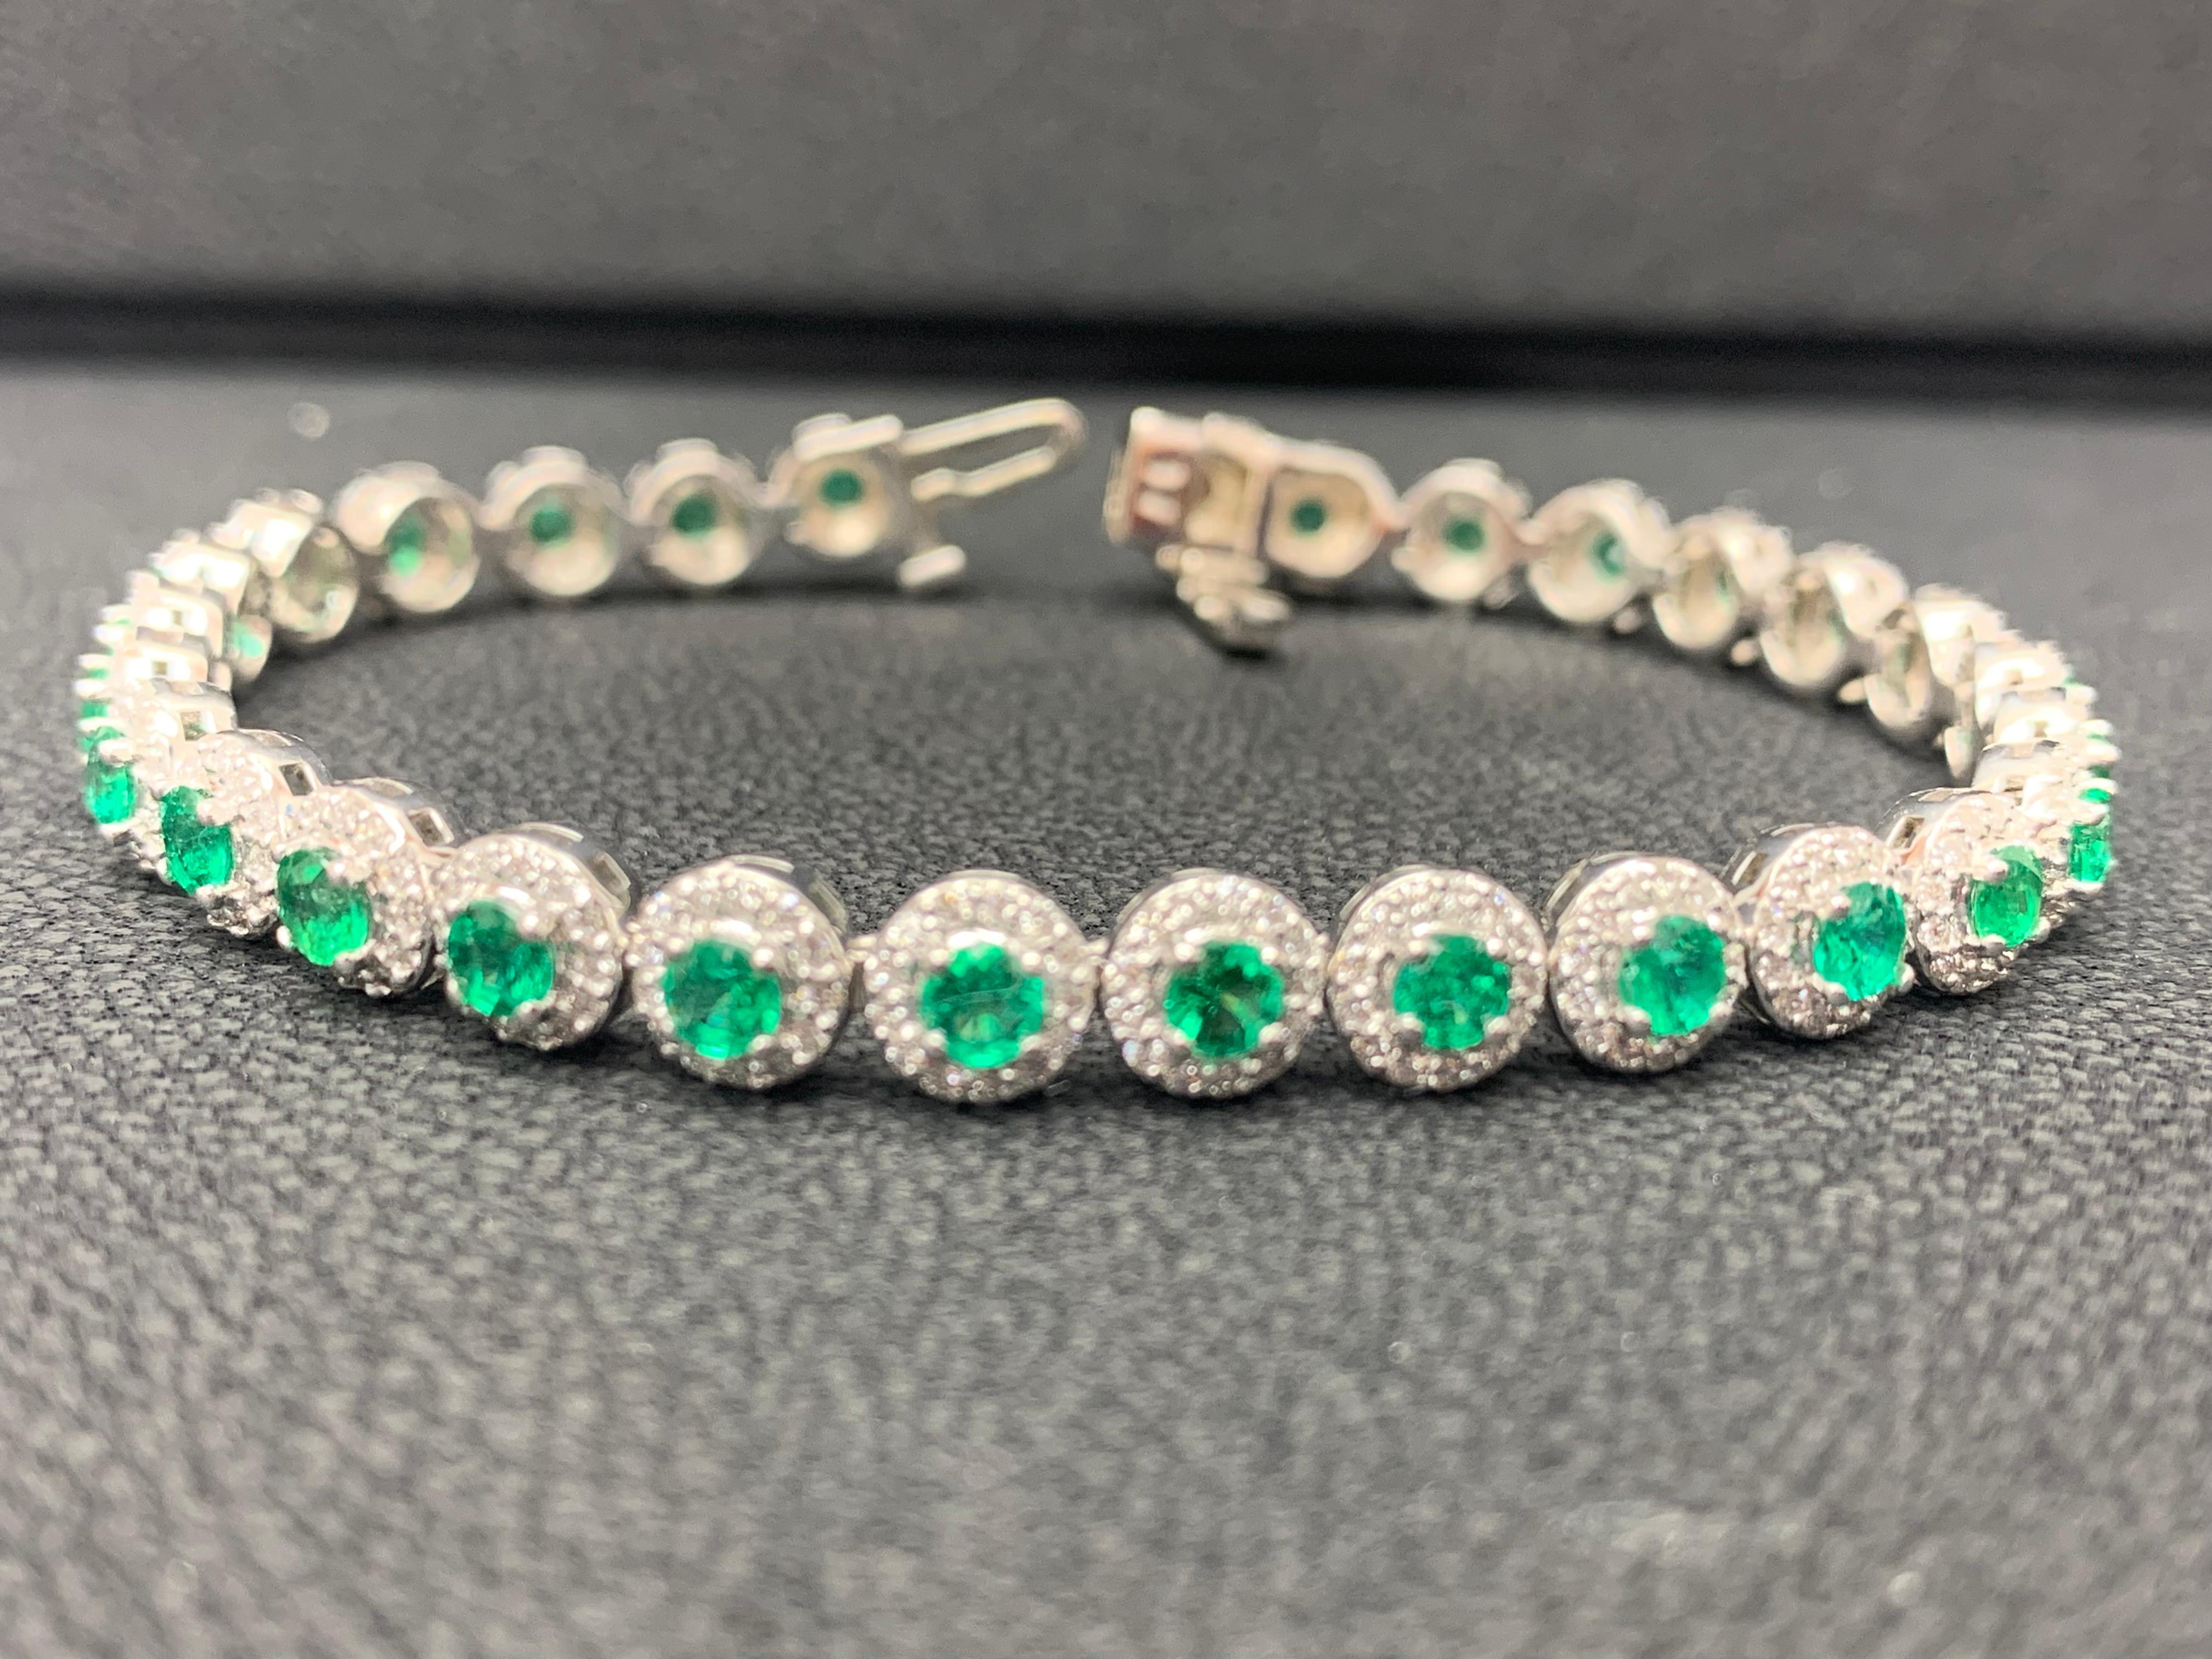 Add color to your style with this gorgeous emerald bracelet. Features 29 Round cut lush green emeralds surrounded by a single row of sparkling round diamonds in a halo setting. Emeralds and diamonds weigh 3.05 carats and 1.57 carats total